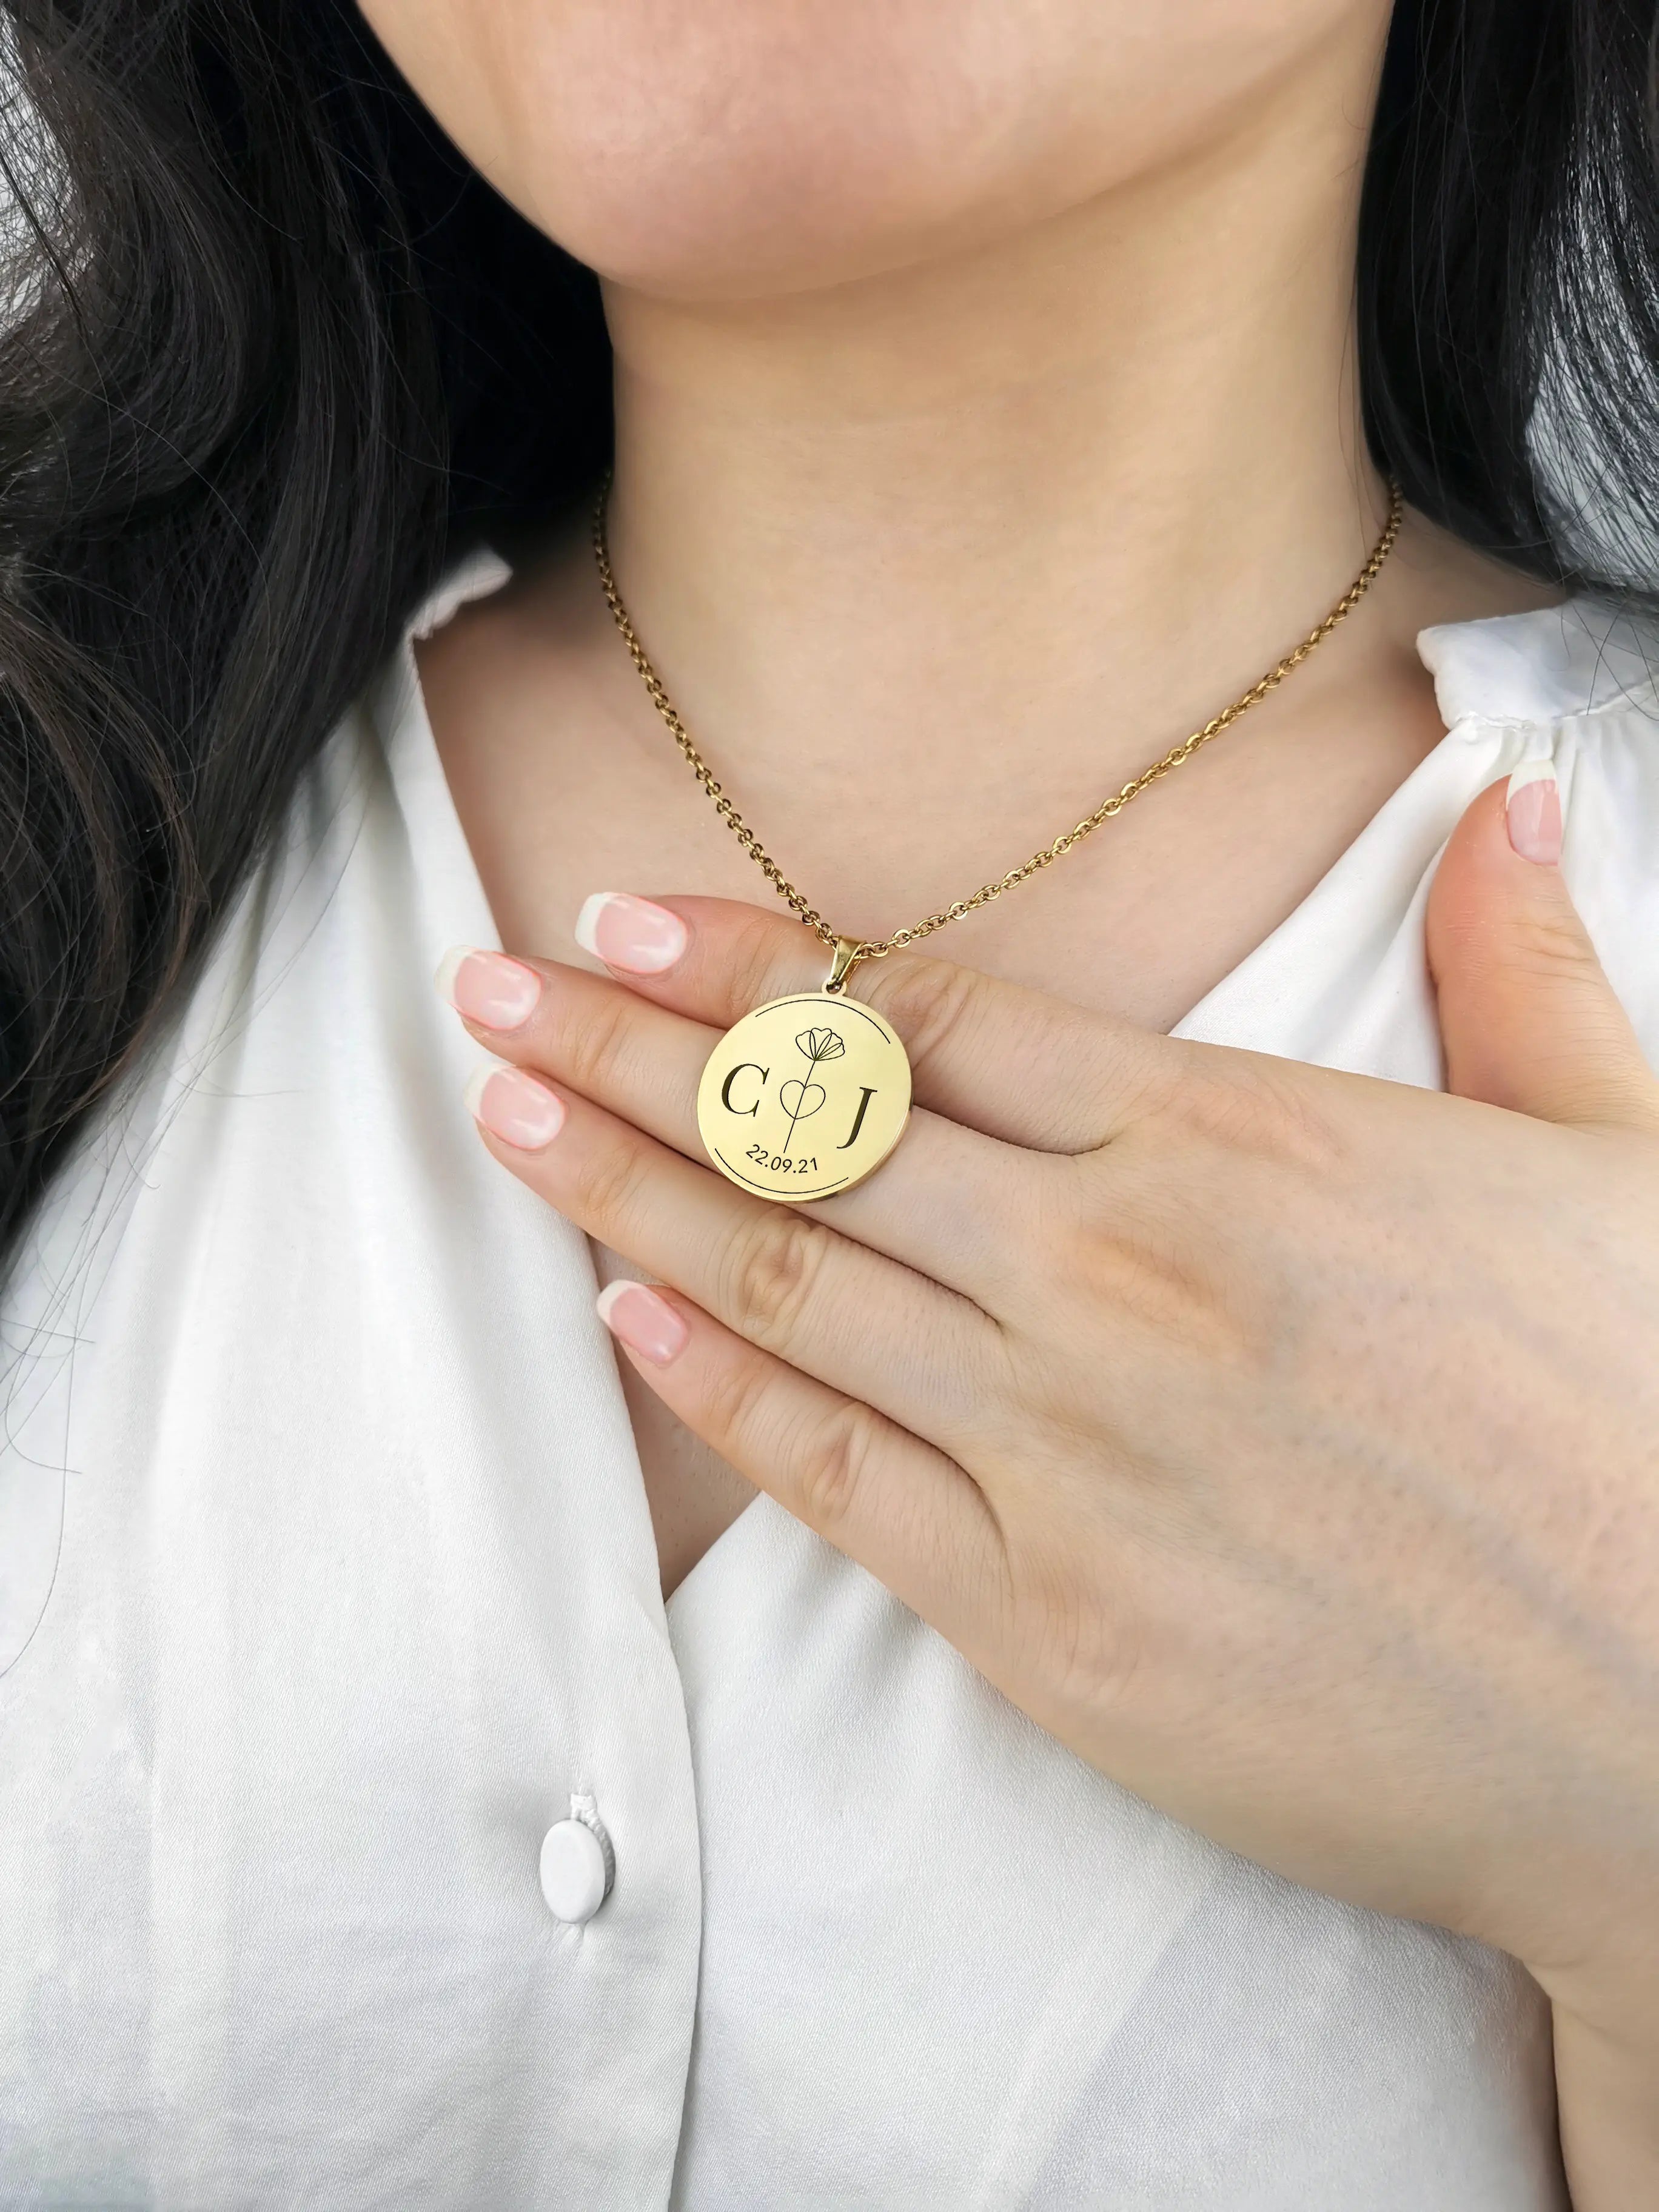 Initials Necklace - Gold